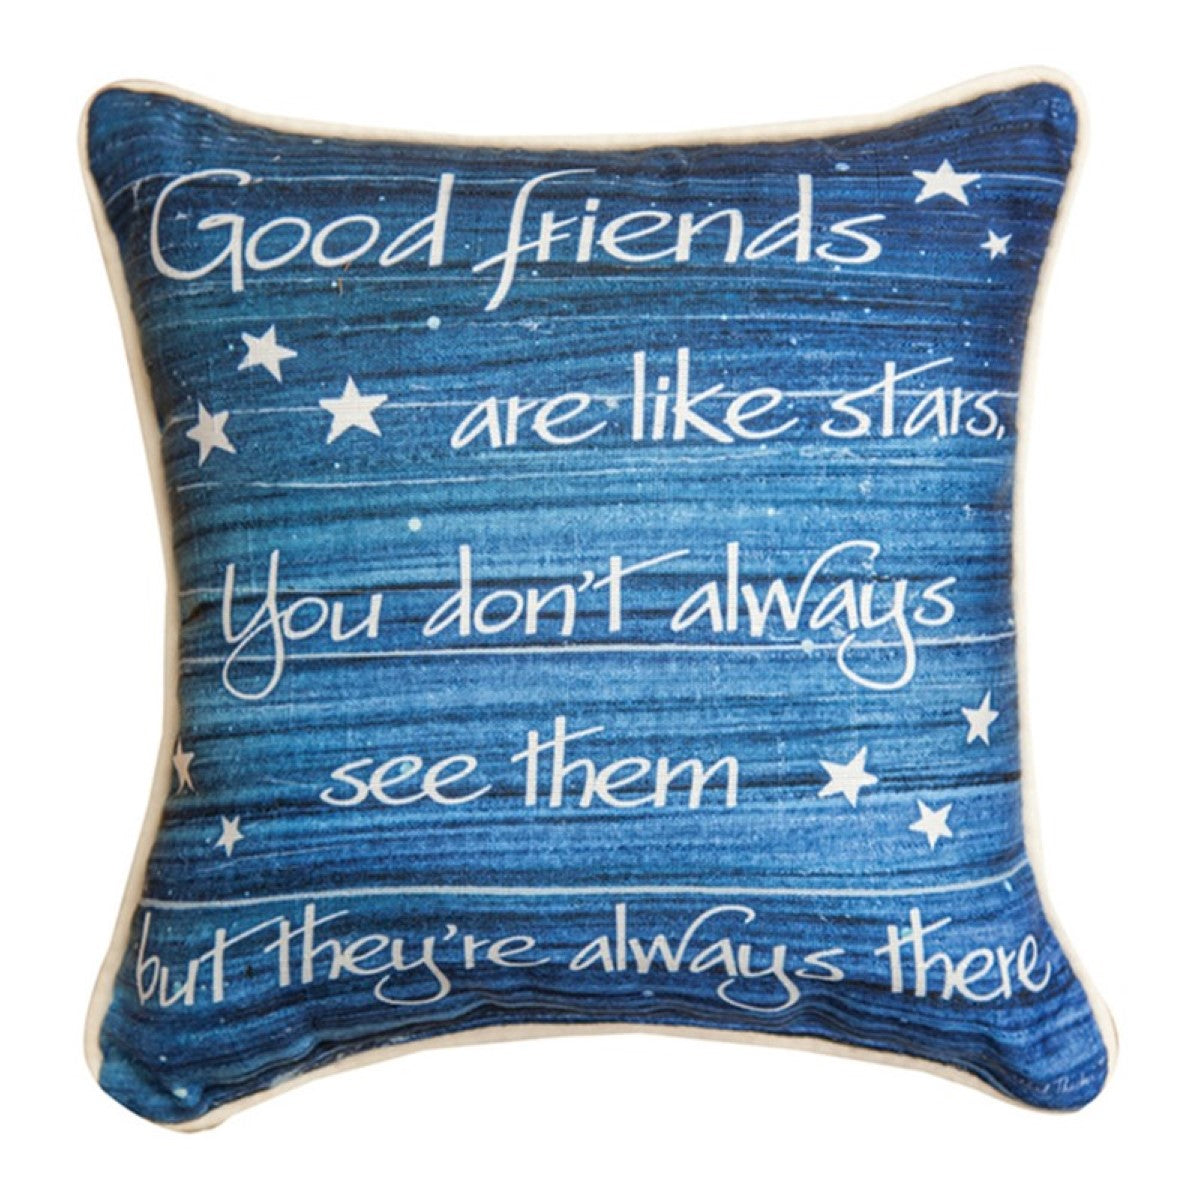 Good Friends Are Like Stars... Word Pillow By Kate Ward Thacker